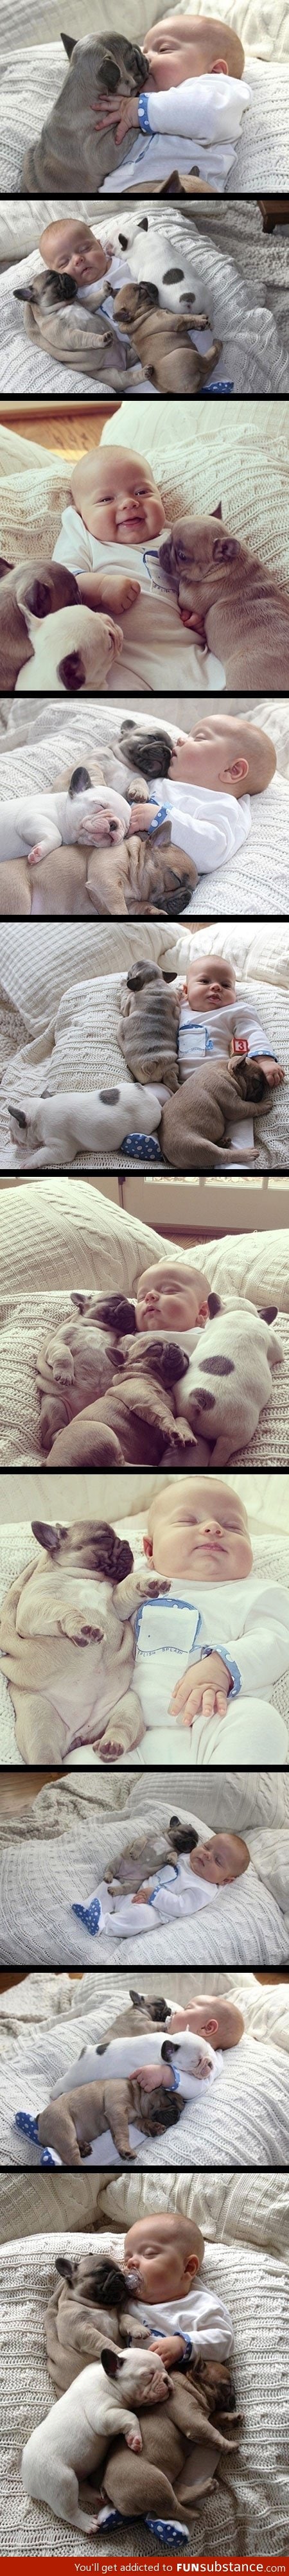 Cuteness overload! French bulldogs and a baby